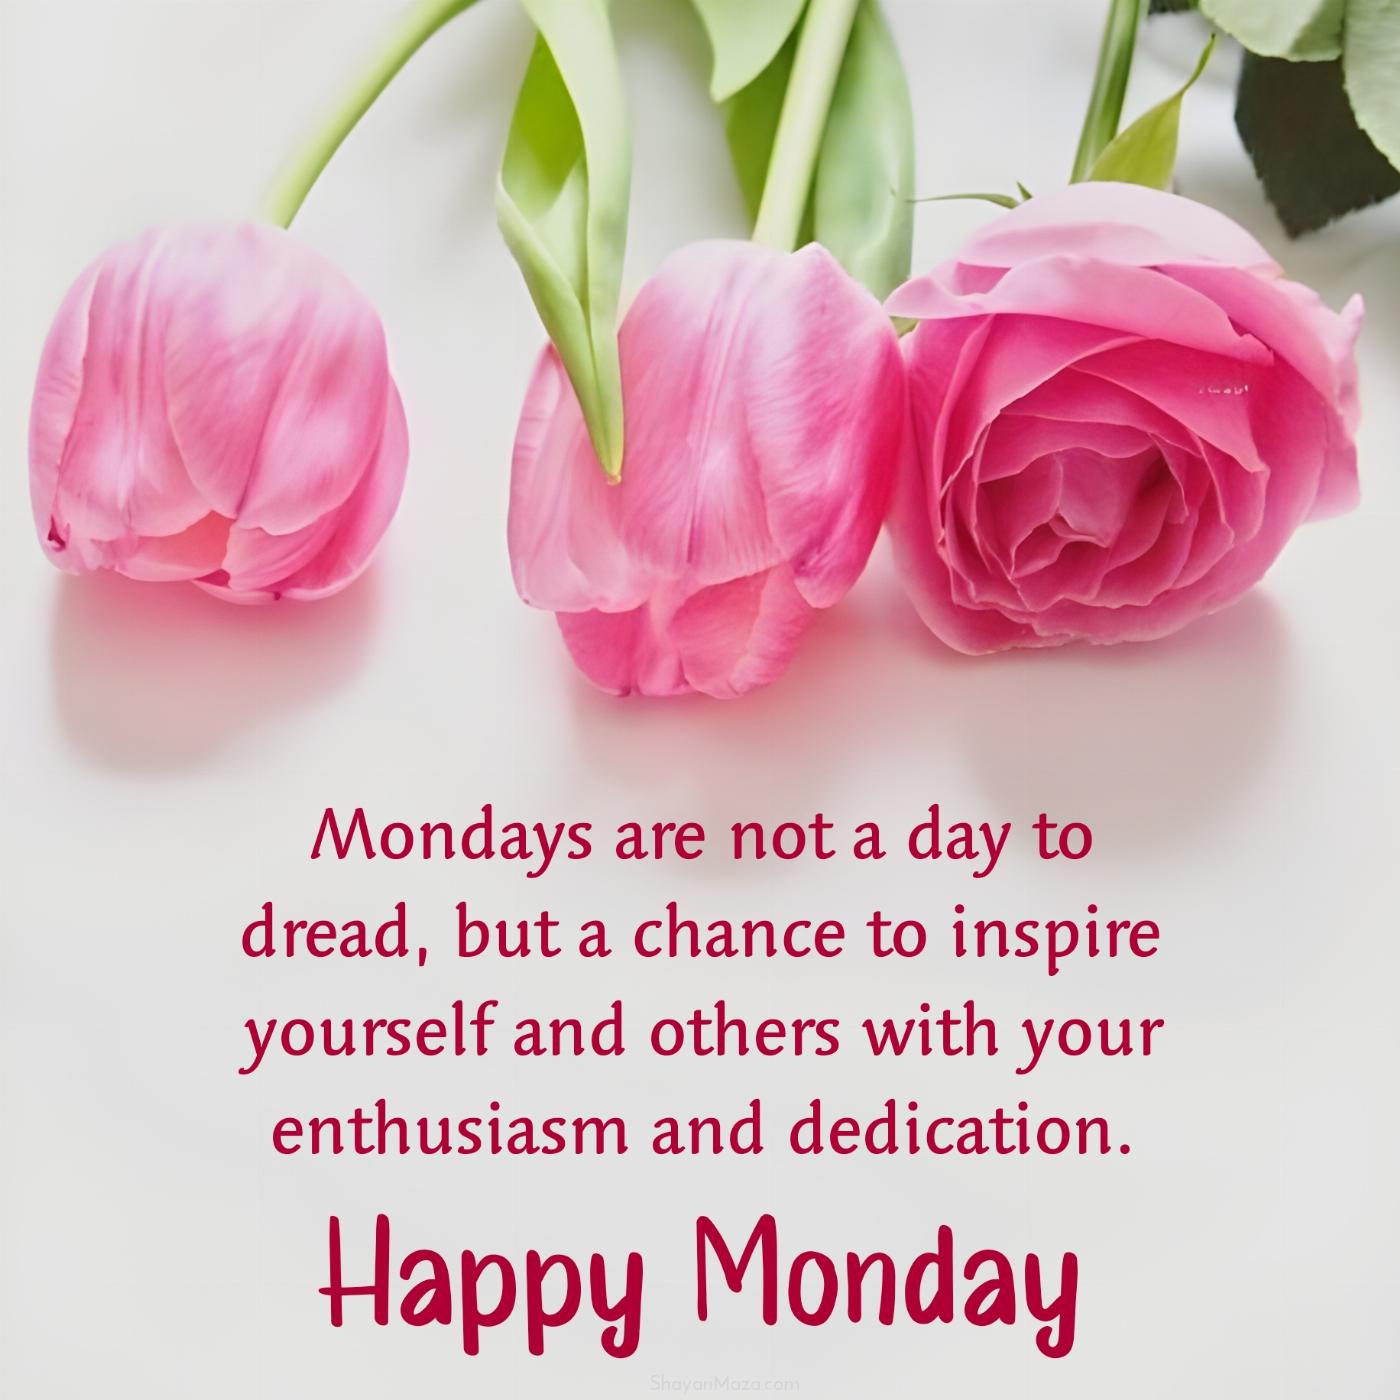 Mondays are not a day to dread but a chance to inspire yourself